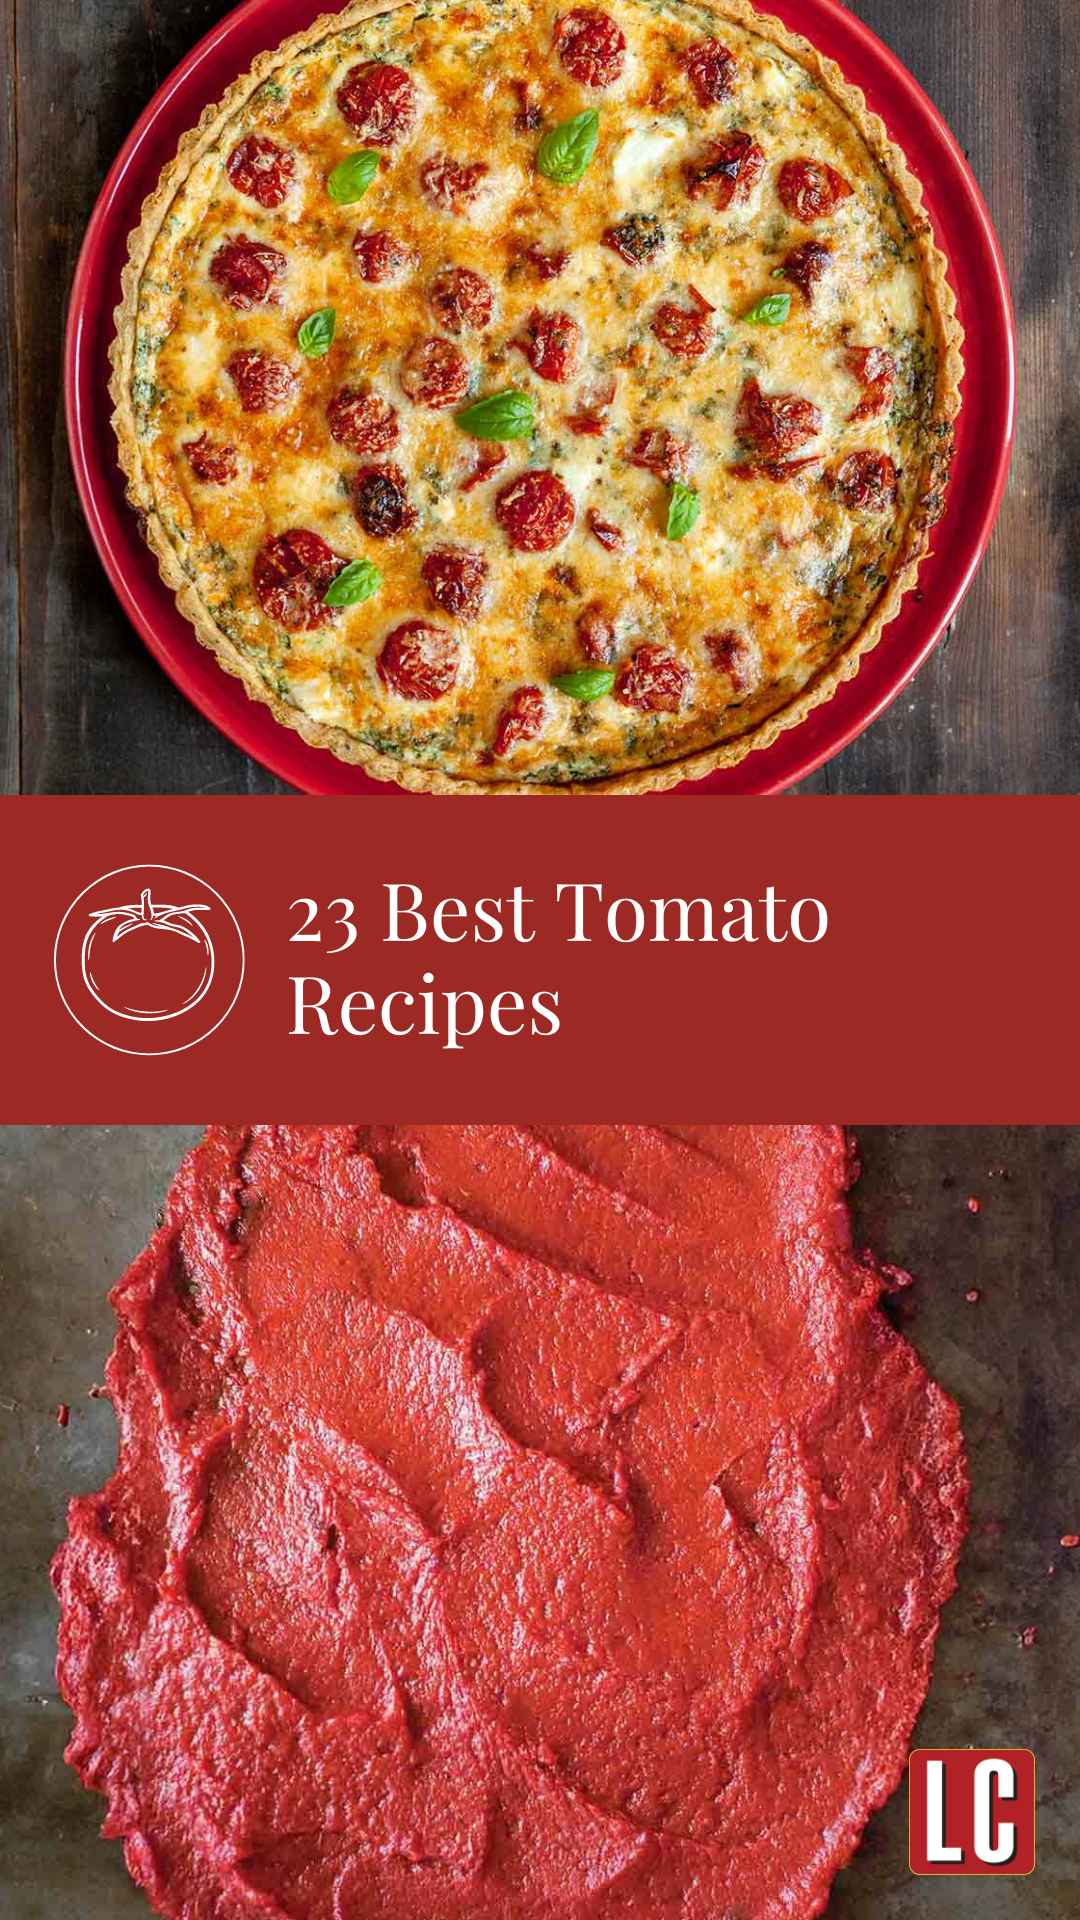 A whole cherry tomato tart on a red plate and a layer of tomato paste smeared on a dark background.